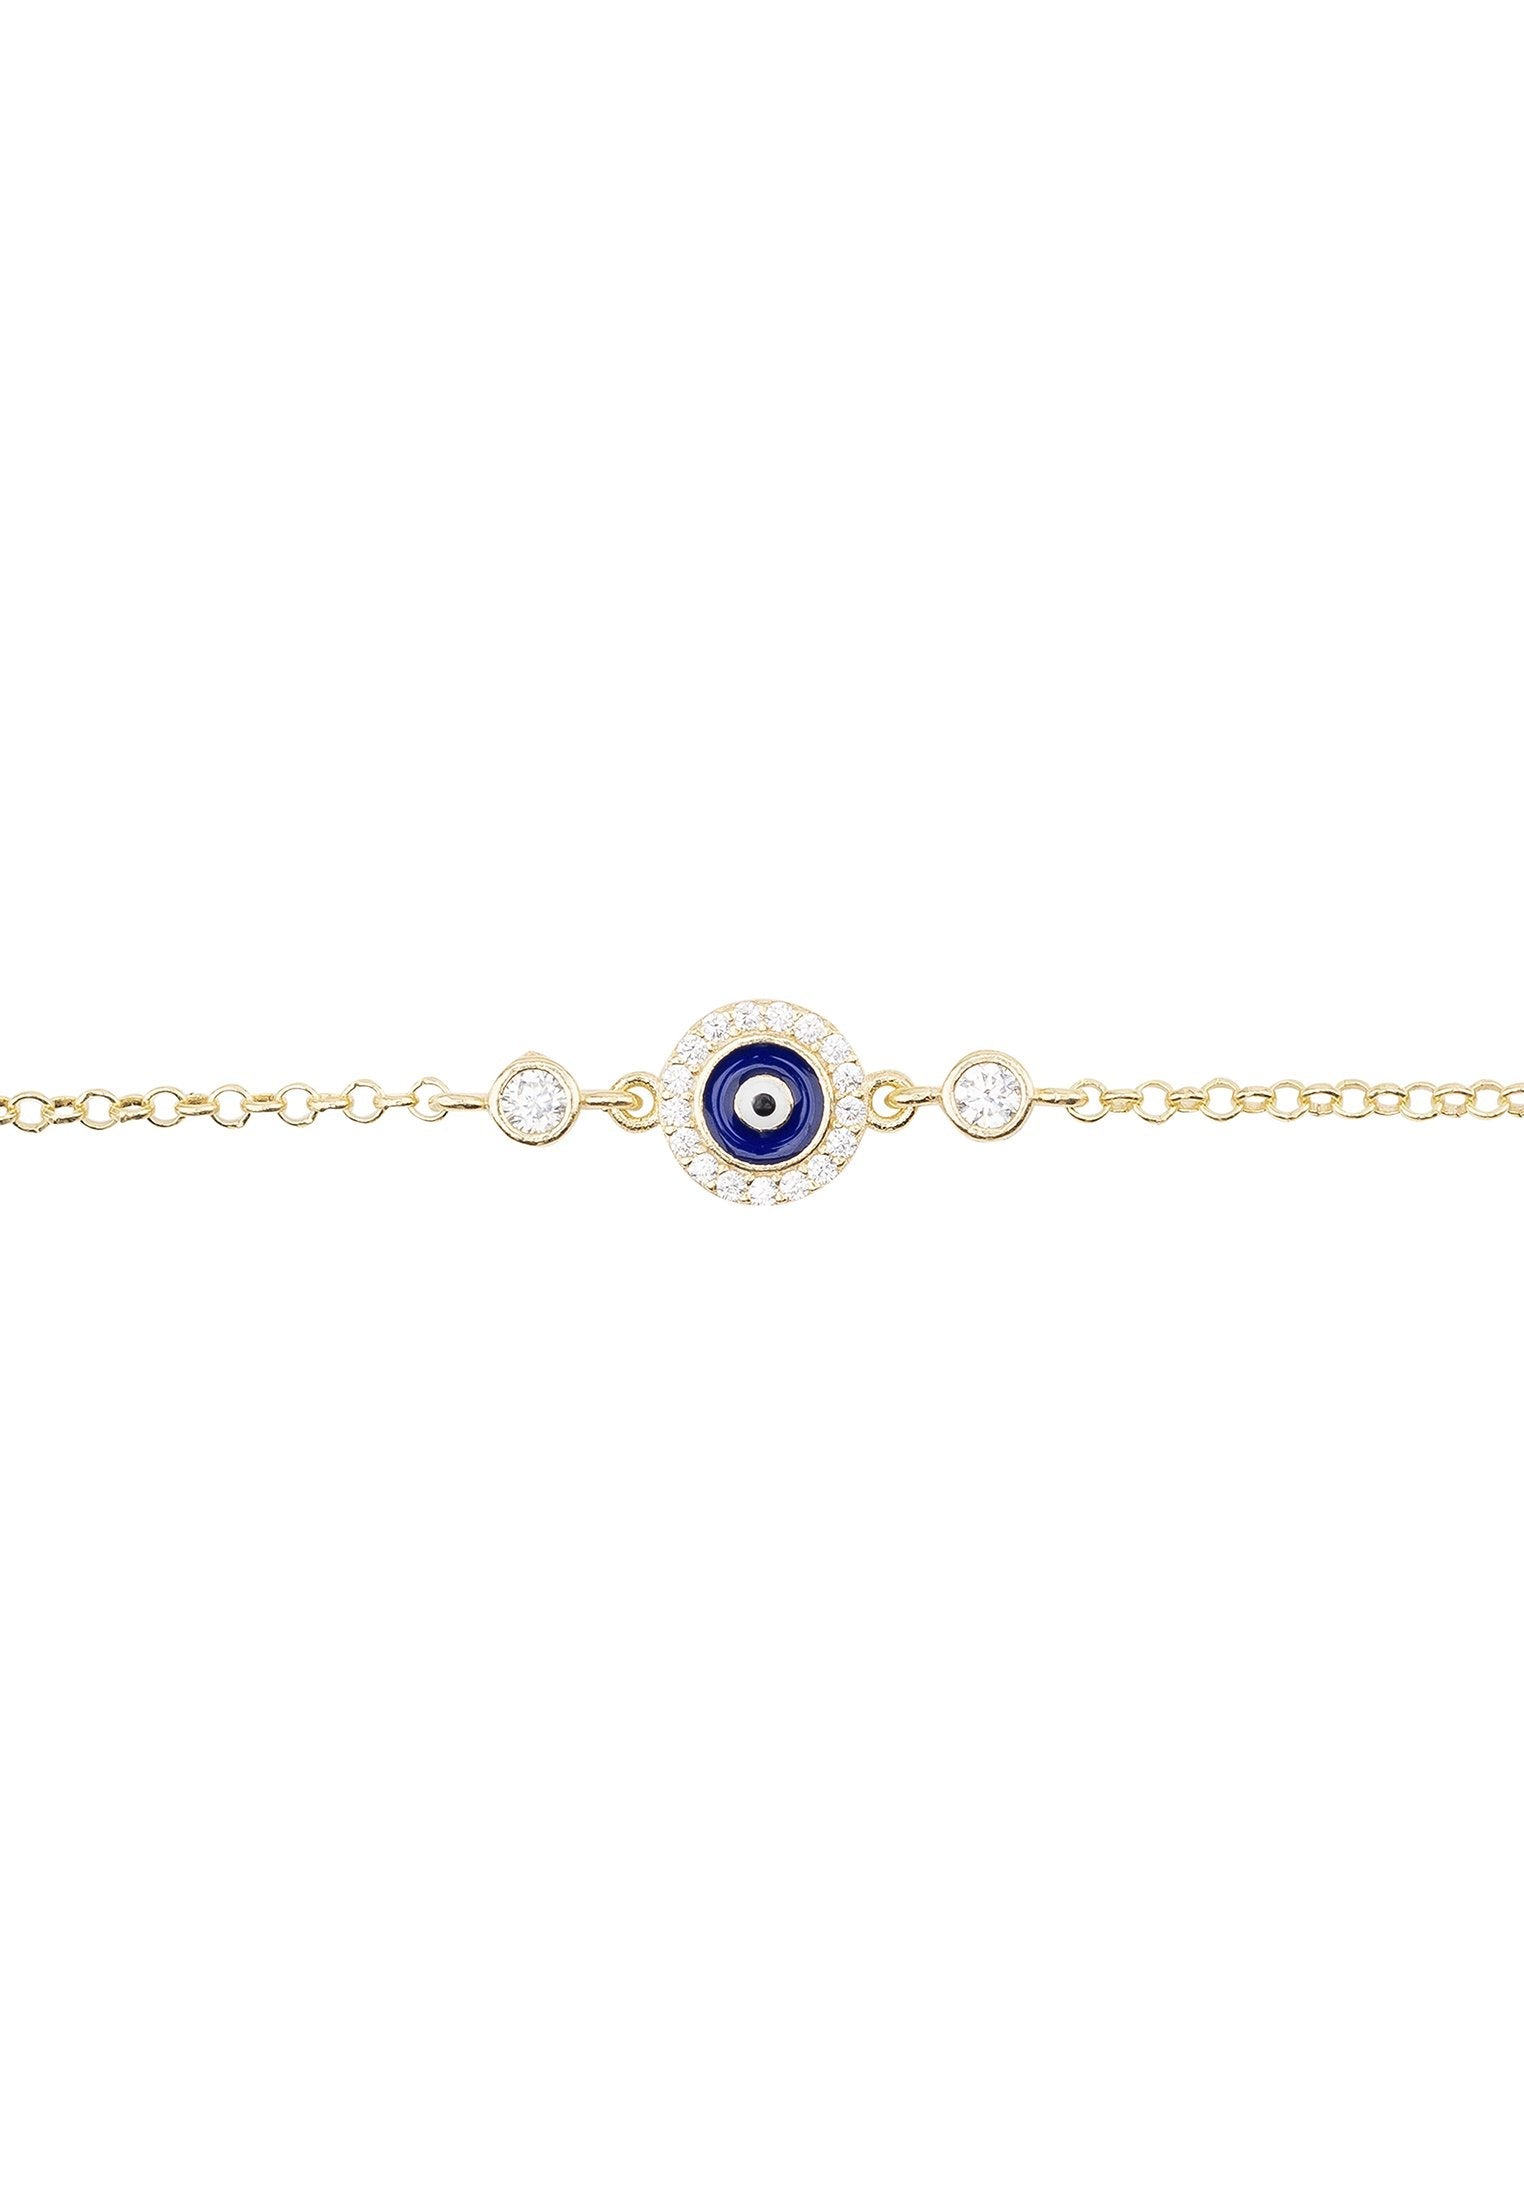 Delicate Evil Eye Enamel Bracelet in Dark Blue and Gold - Handcrafted Sterling Silver with Zircons and Cubic Zirconia Bijou Her